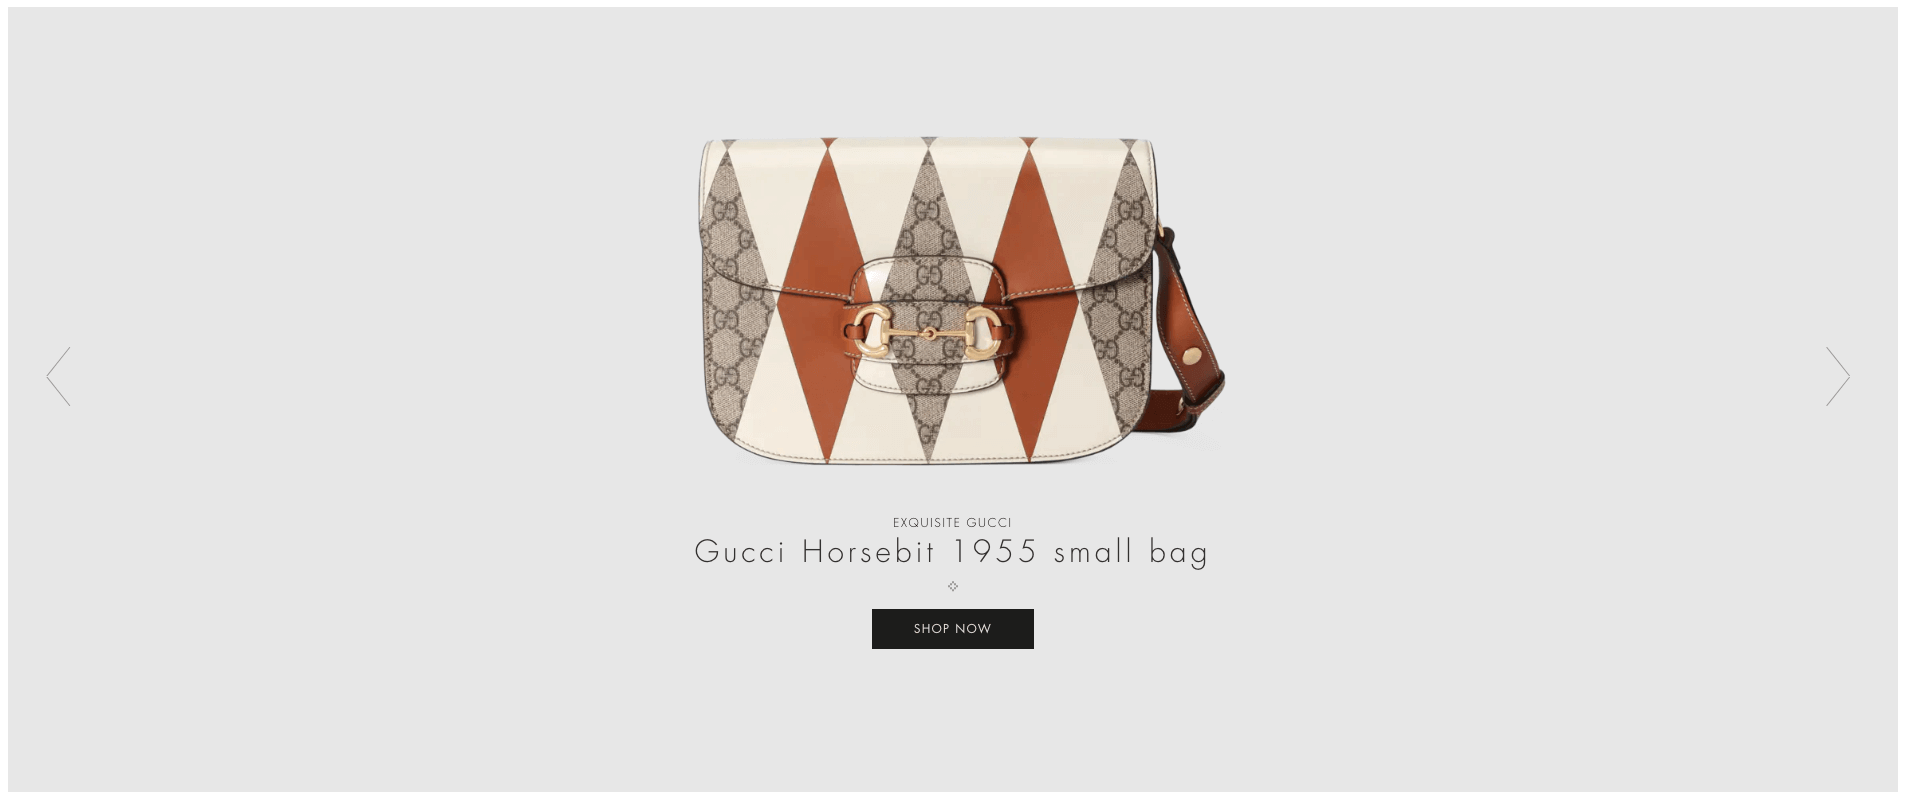 Why Simplicity Makes For Good UX: Gucci Landing Page Example